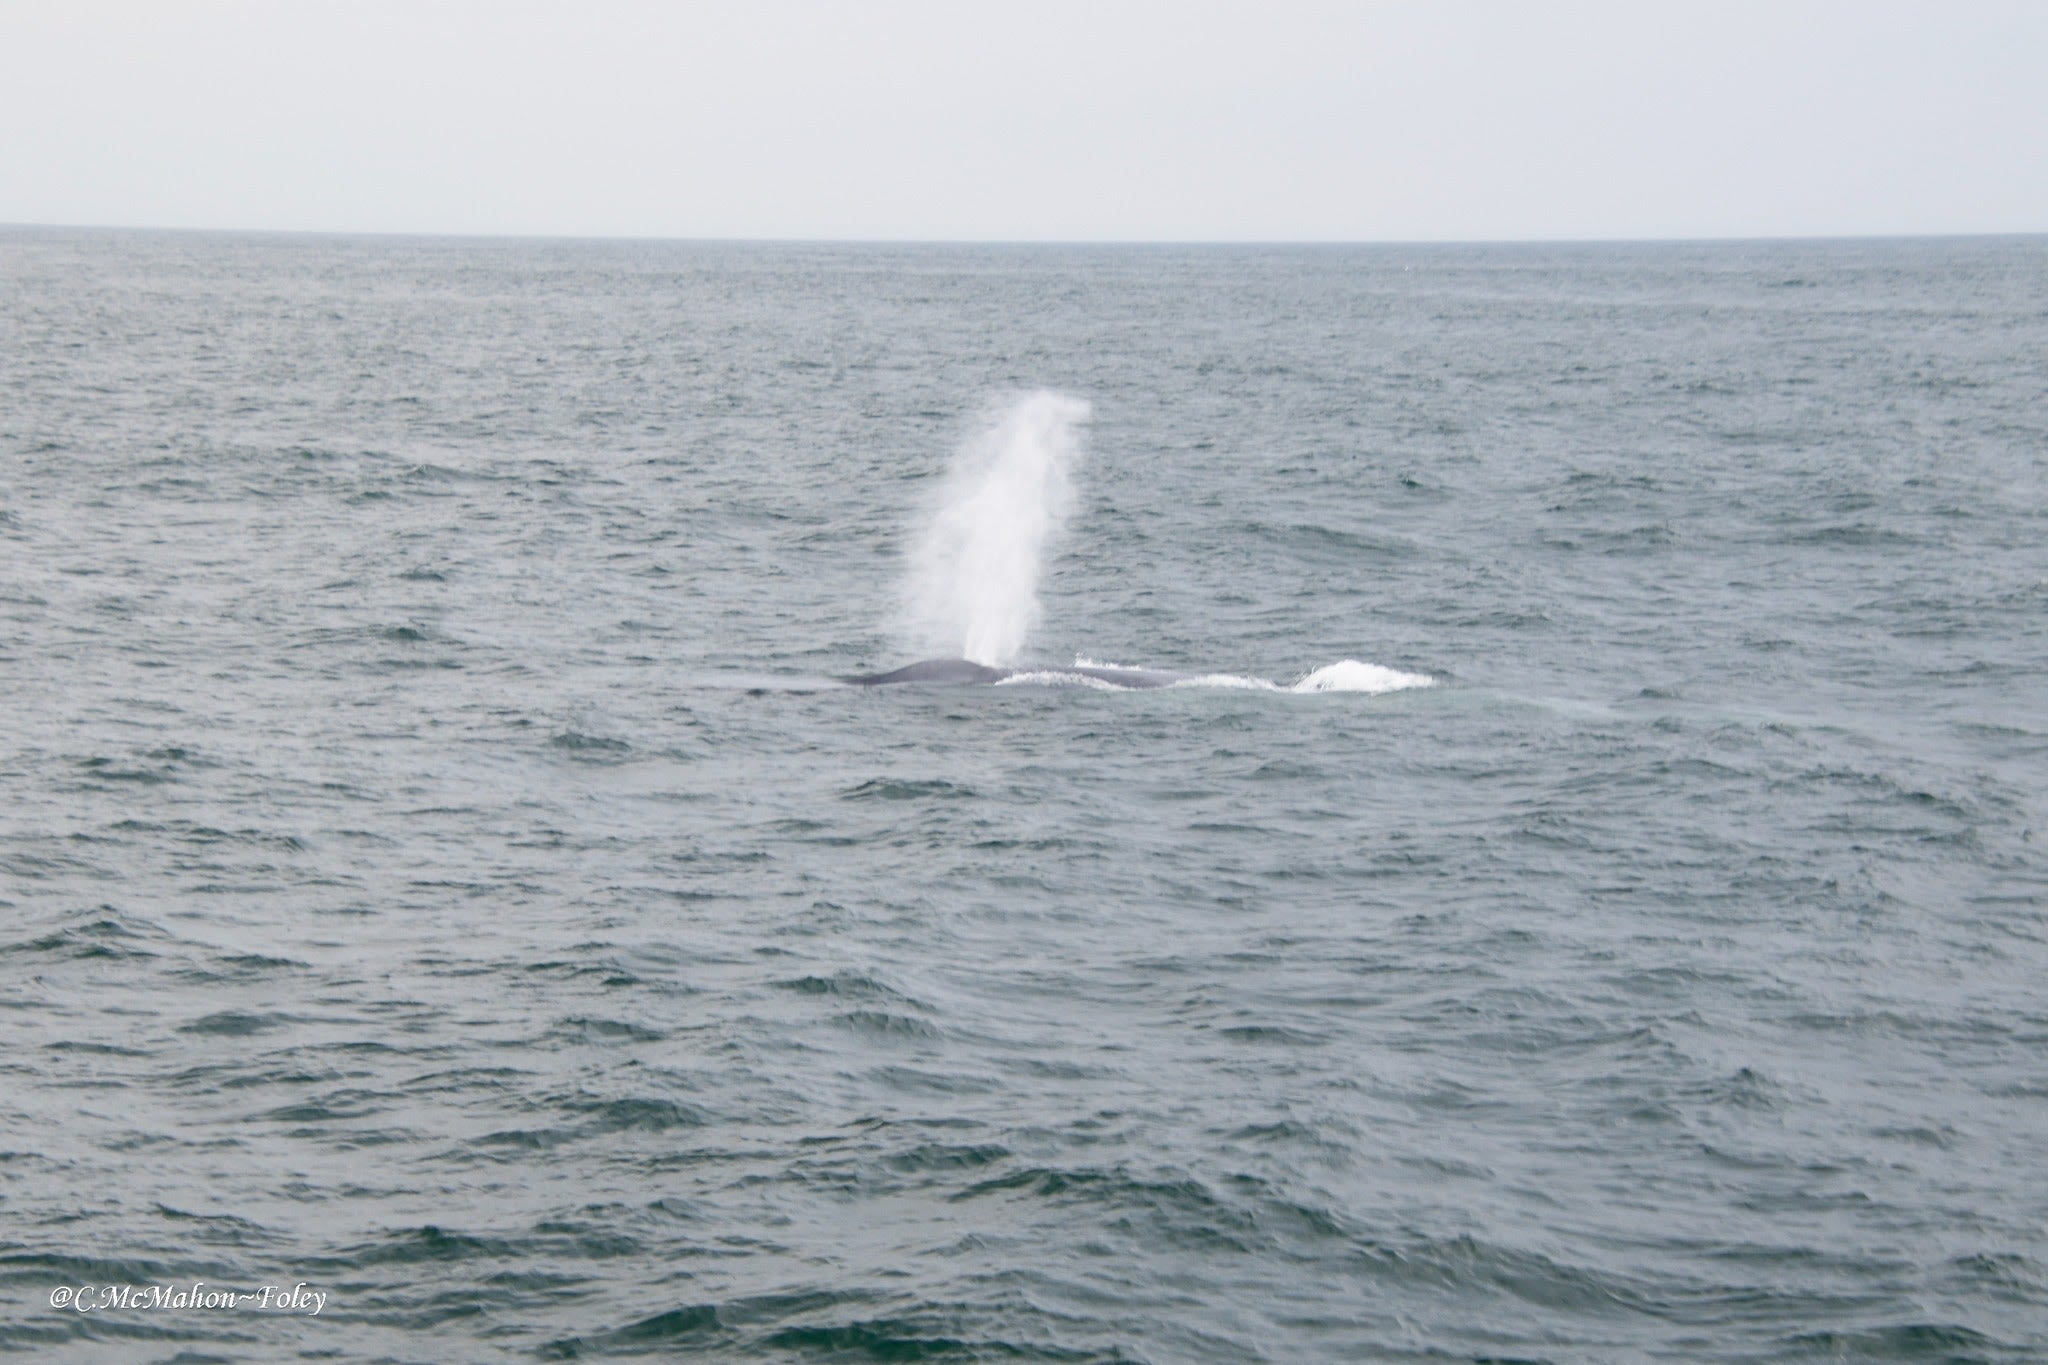 Watchers off Cape Ann got a rare look at the world's largest species